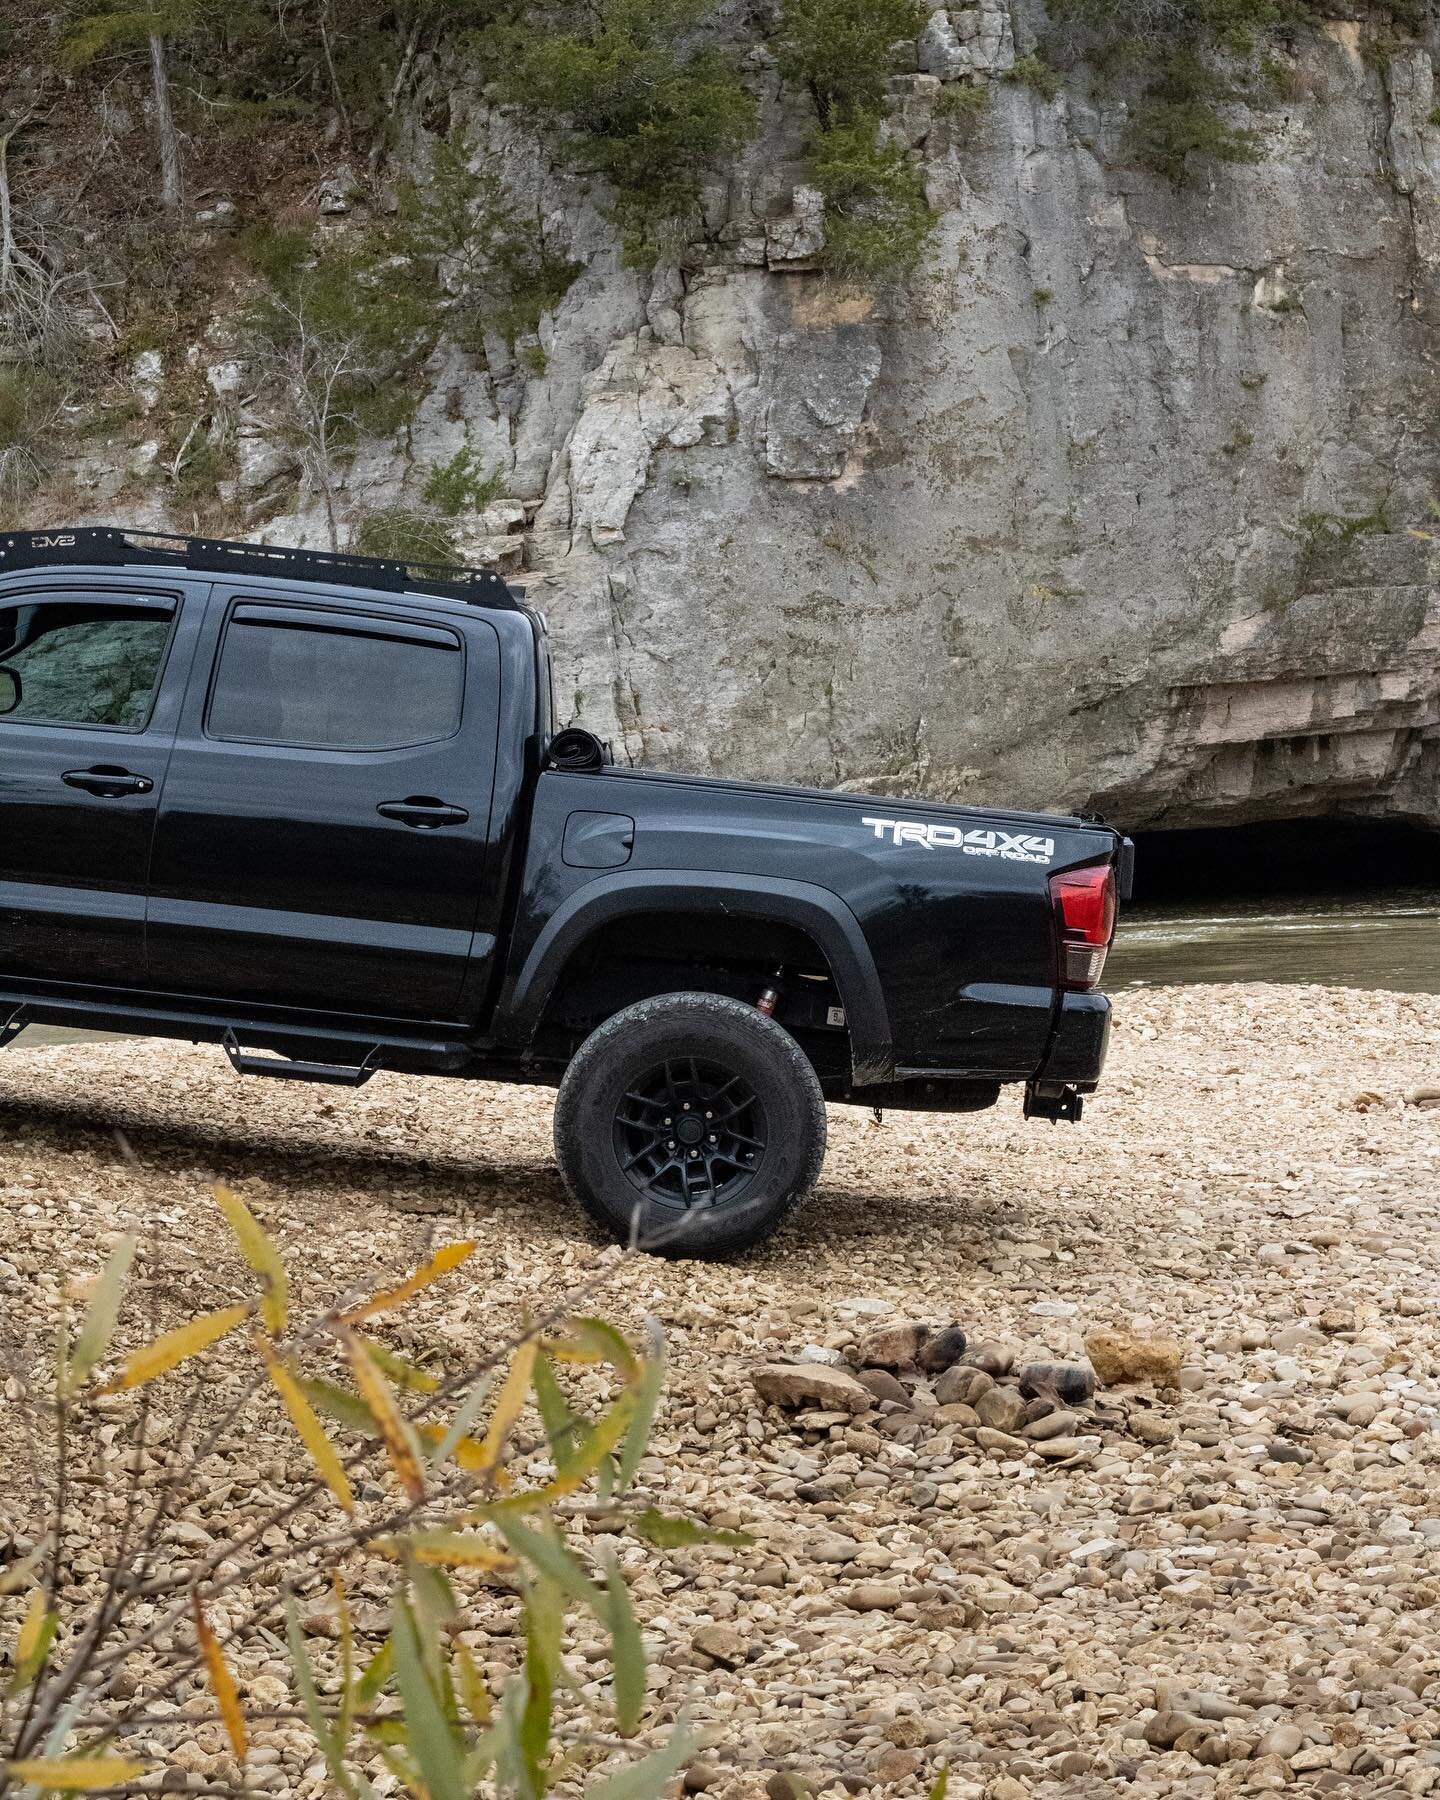 I wish I knew how to make those cool panning photos.. but I&rsquo;ll just say it&rsquo;s a #taillighttuesday post

#overland #toyota #tacoma #offroad #buffaloriver #trucks #photos #tailgate #trd